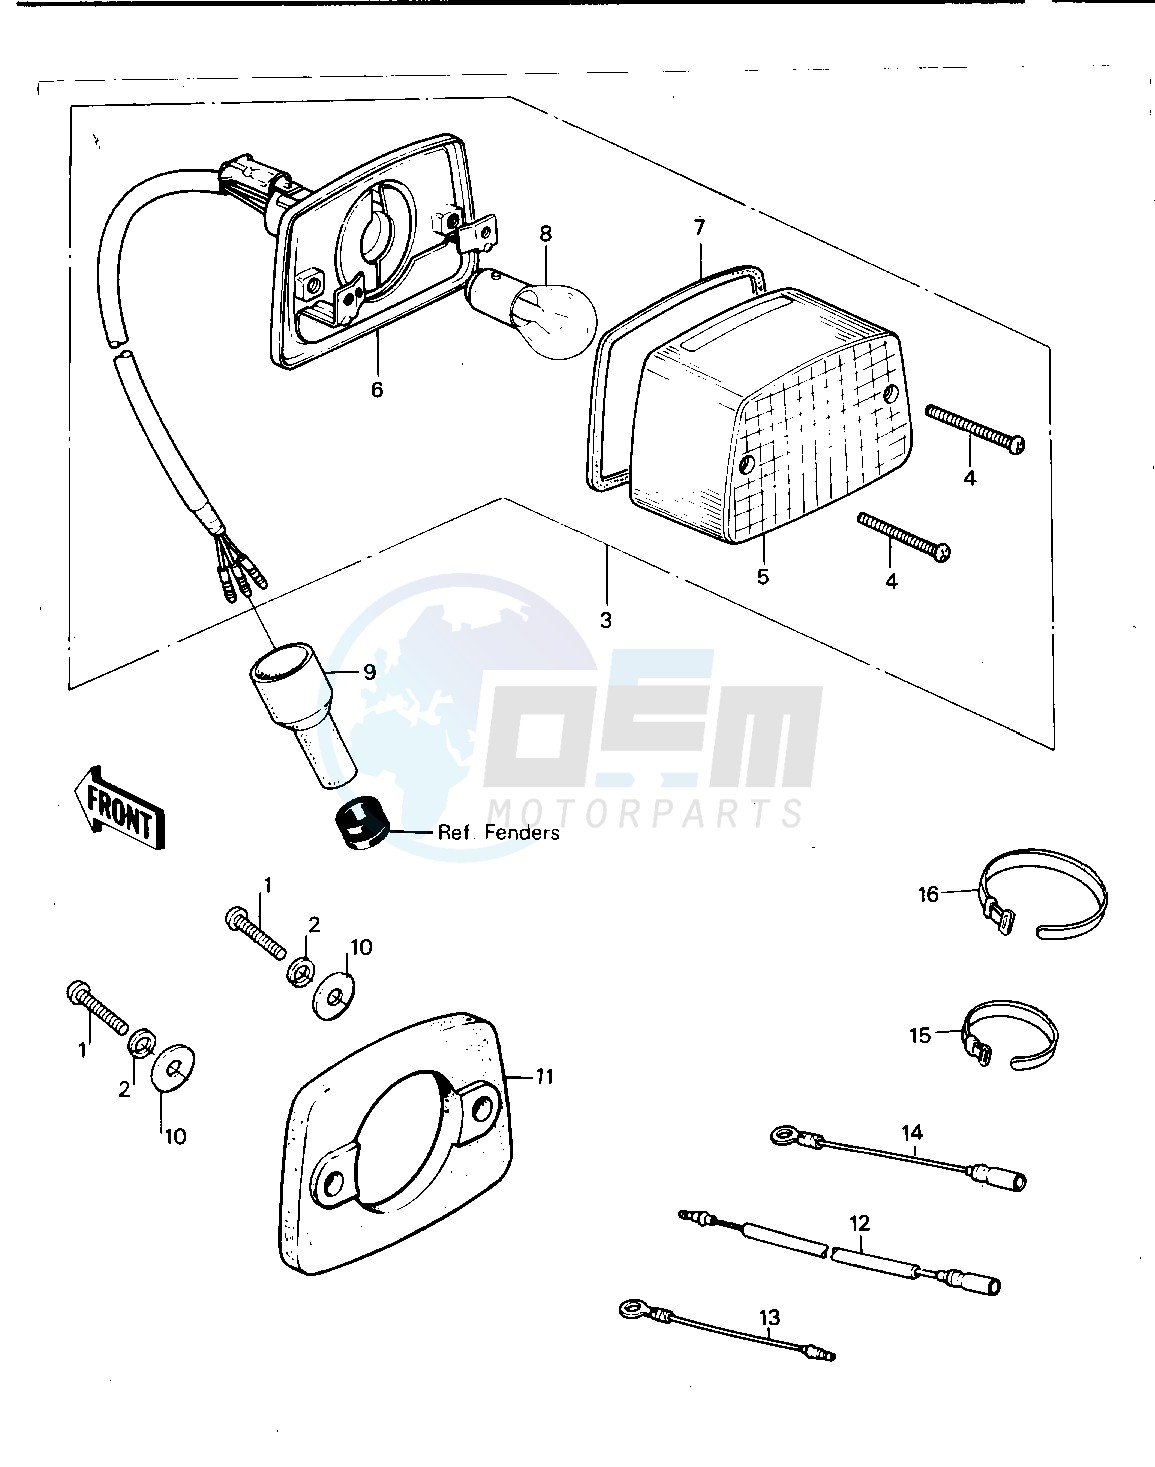 TAILLIGHT_CHASSIS ELECTRICAL EQUIPMENT blueprint